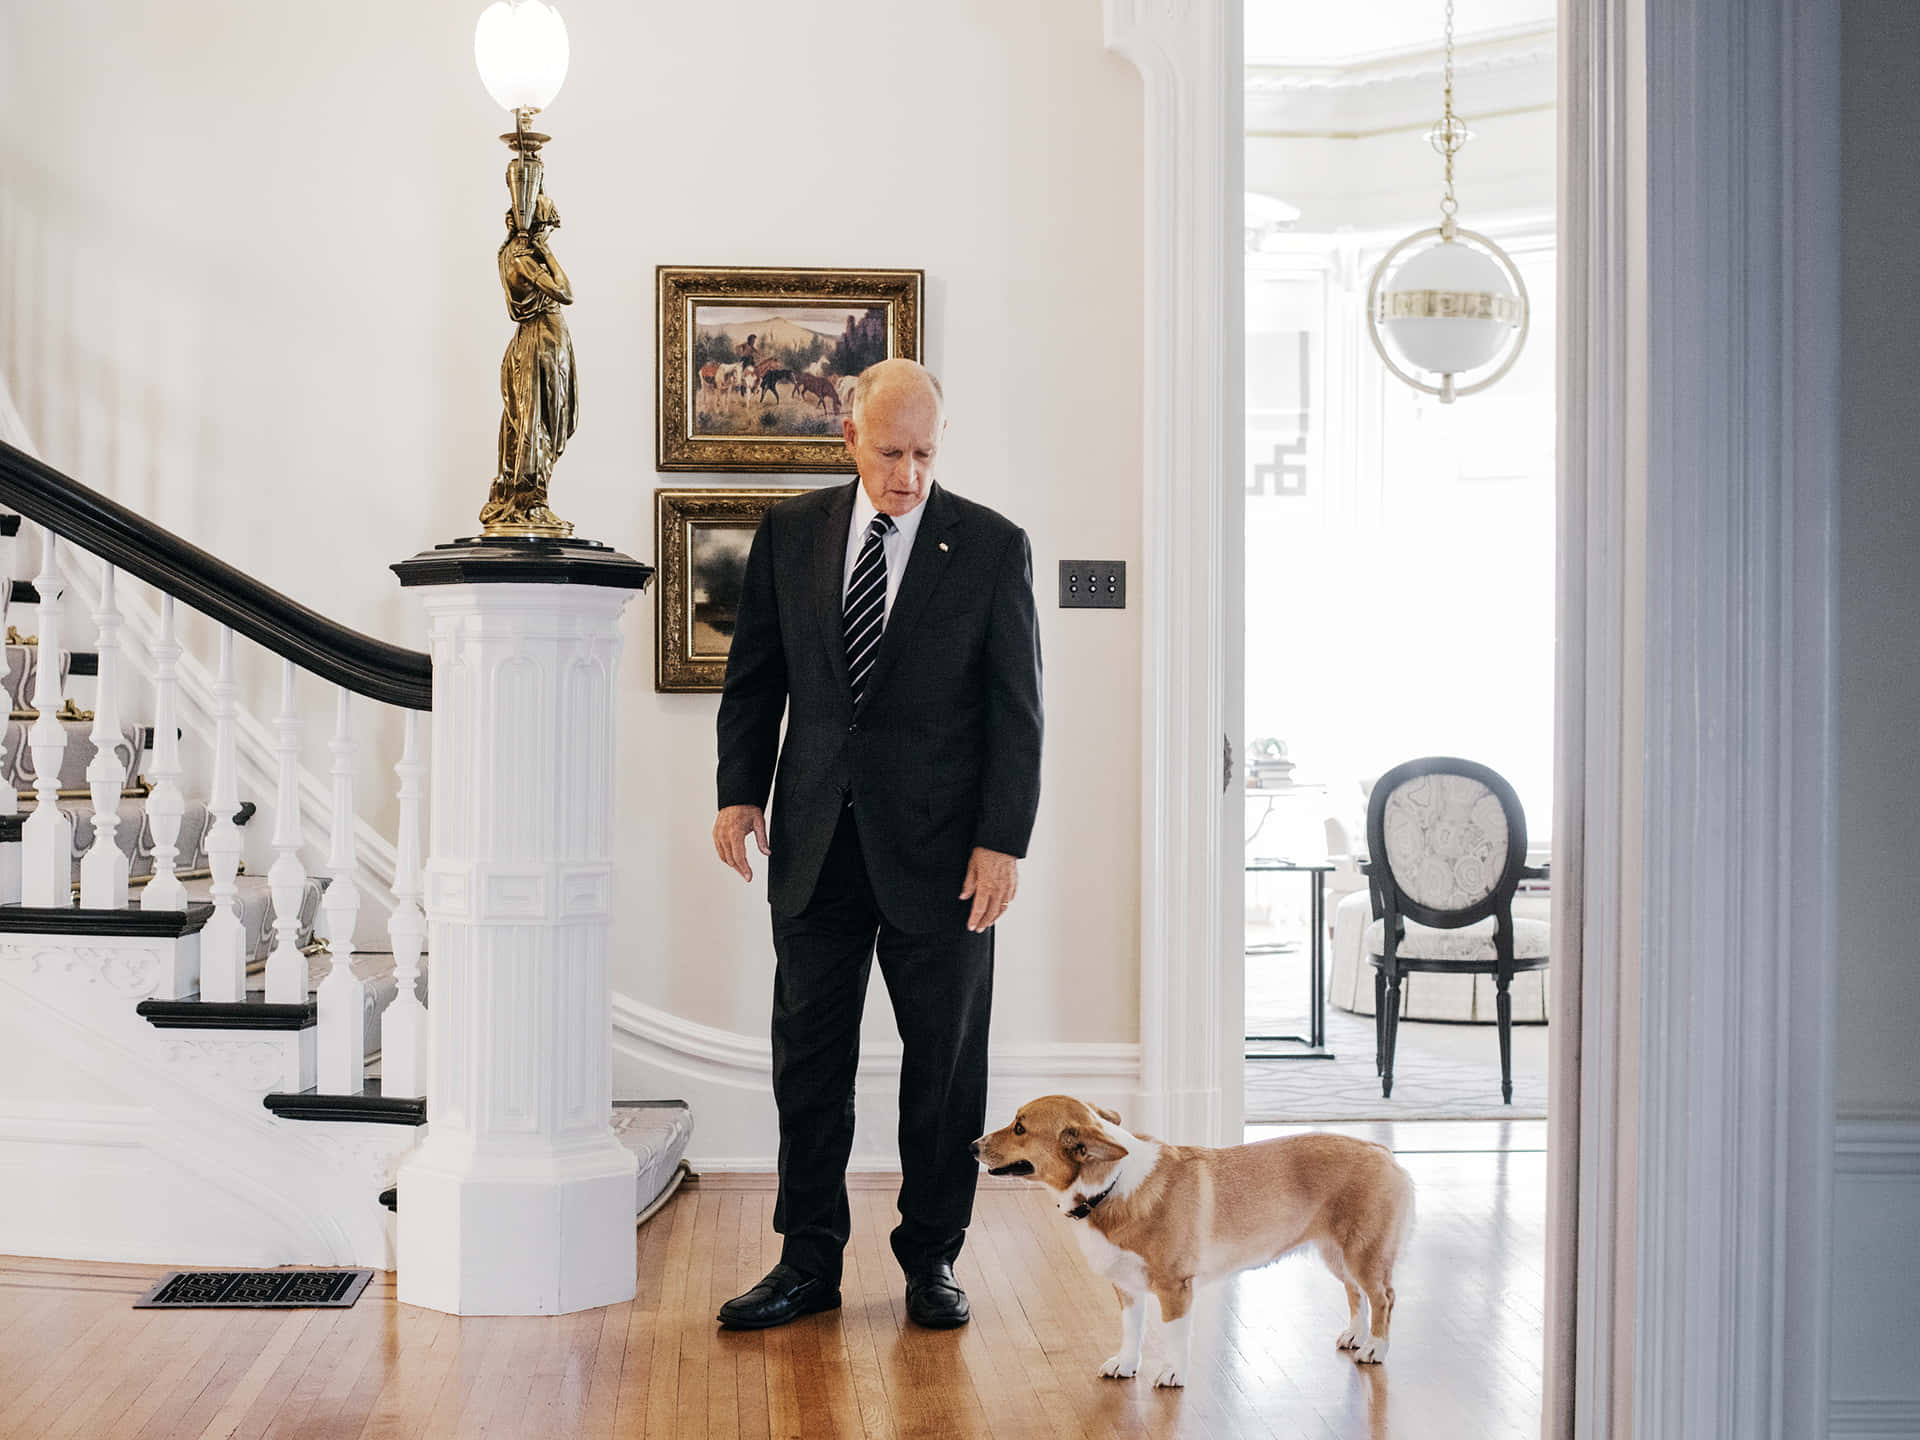 Governor Jerry Brown with his dog Wallpaper